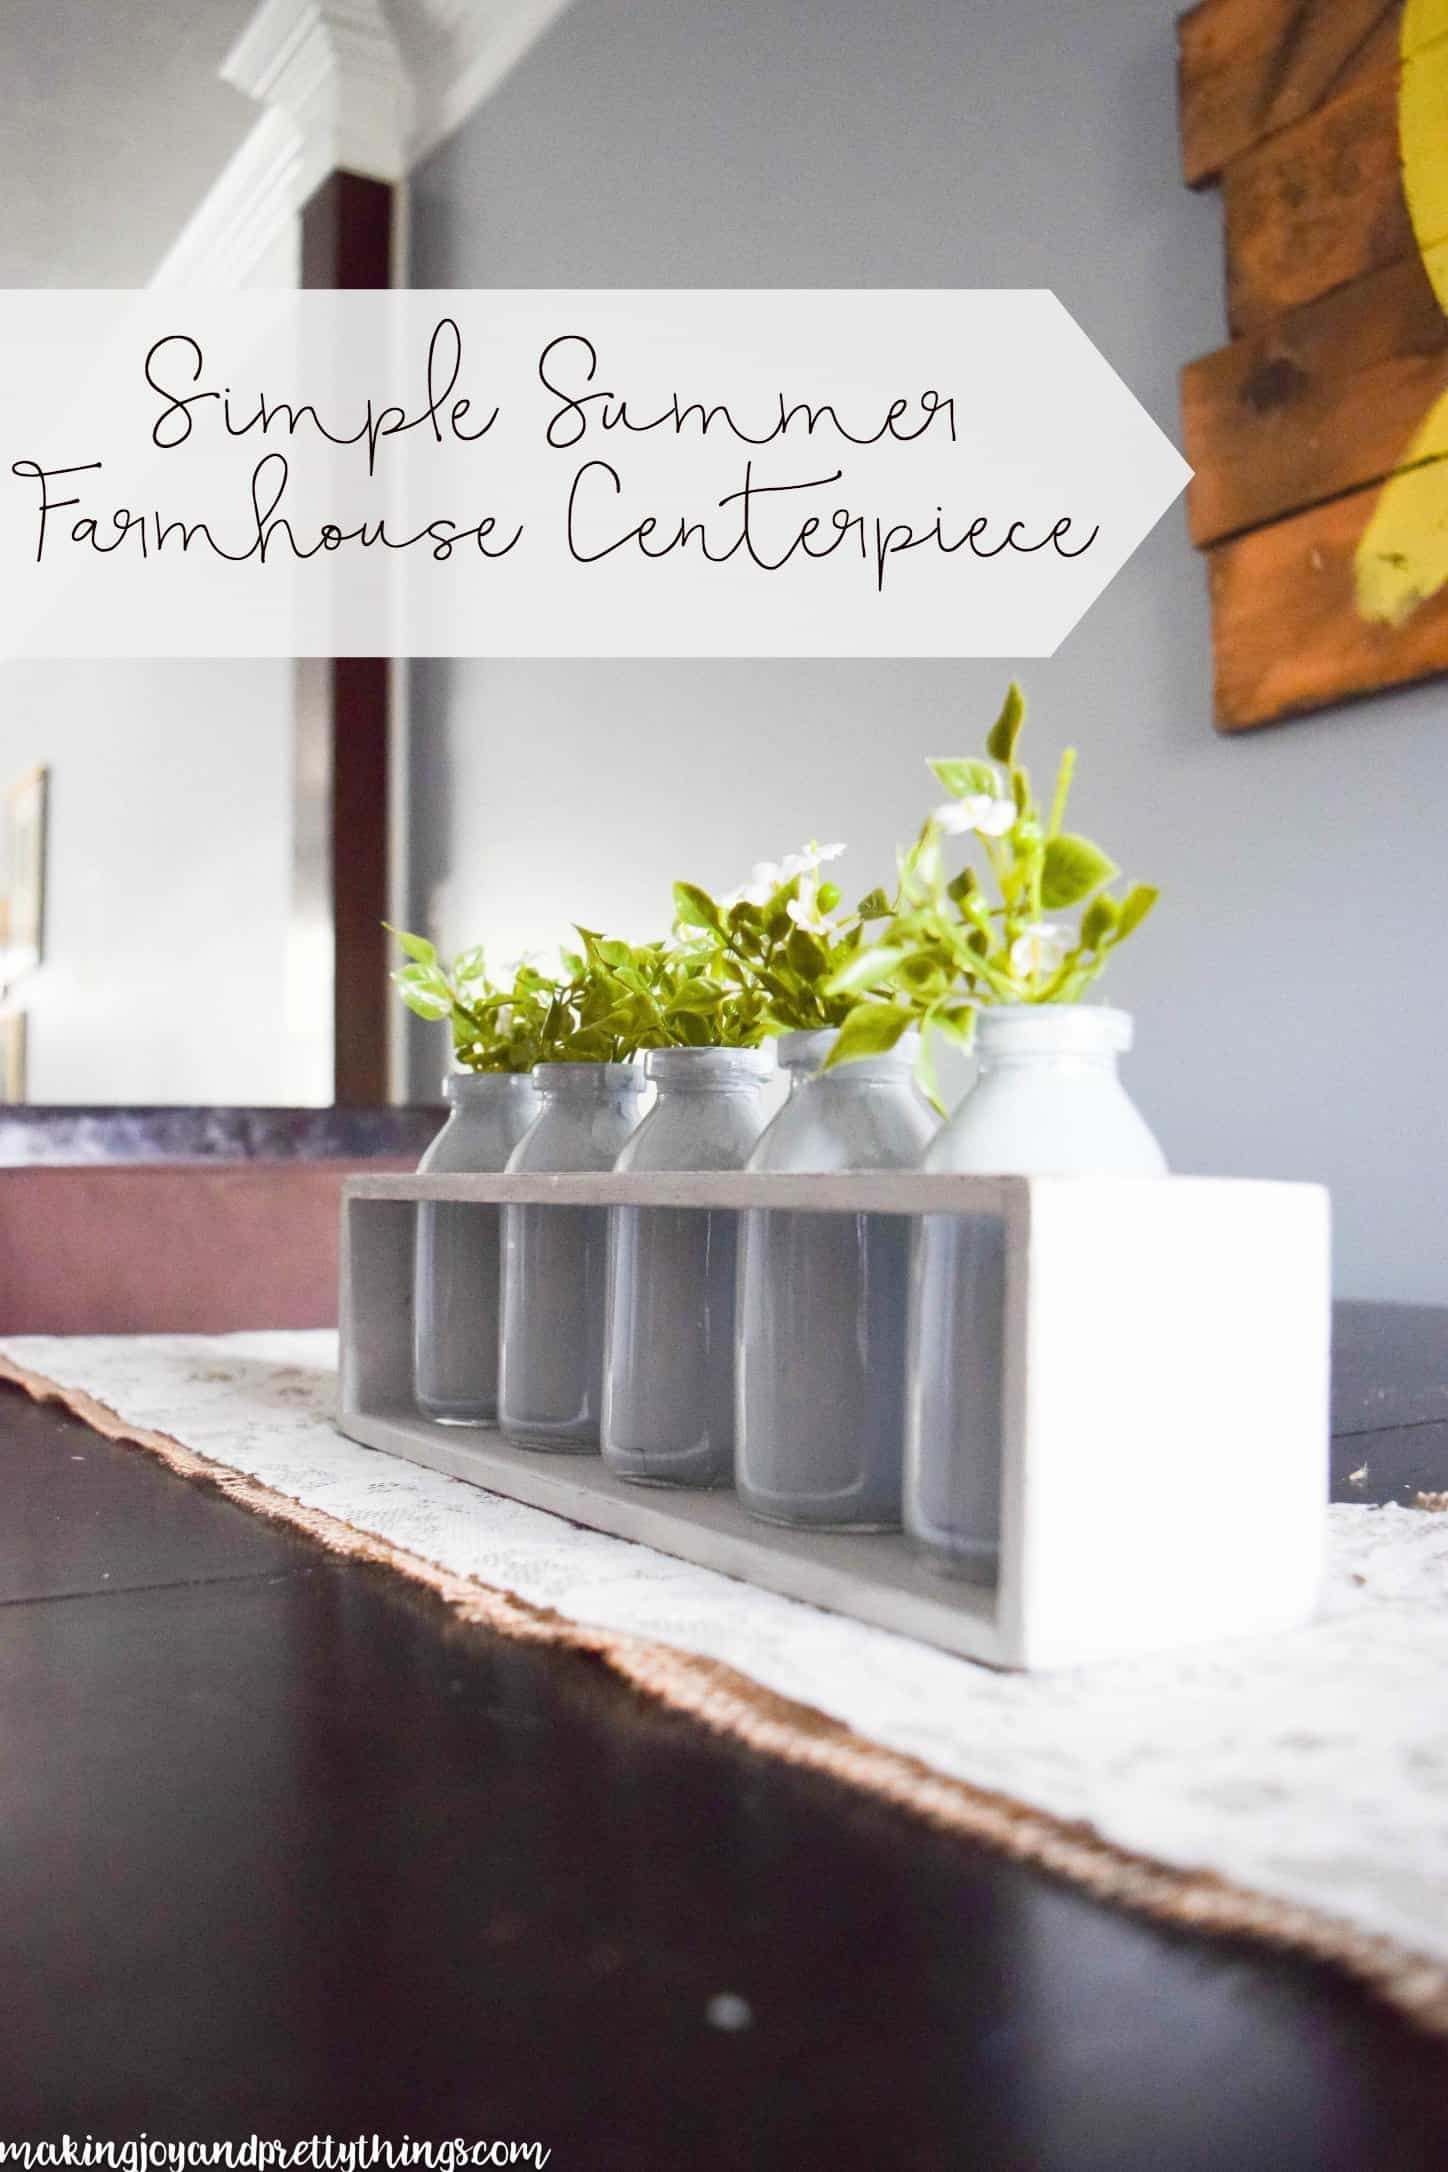 Simple Summer Farmhouse Centerpiece. This is so pretty and an easy DIY to add farmhouse style and fixer upper style to your home. Summer DIY decor project plus links to other great summer DIY decor projects!